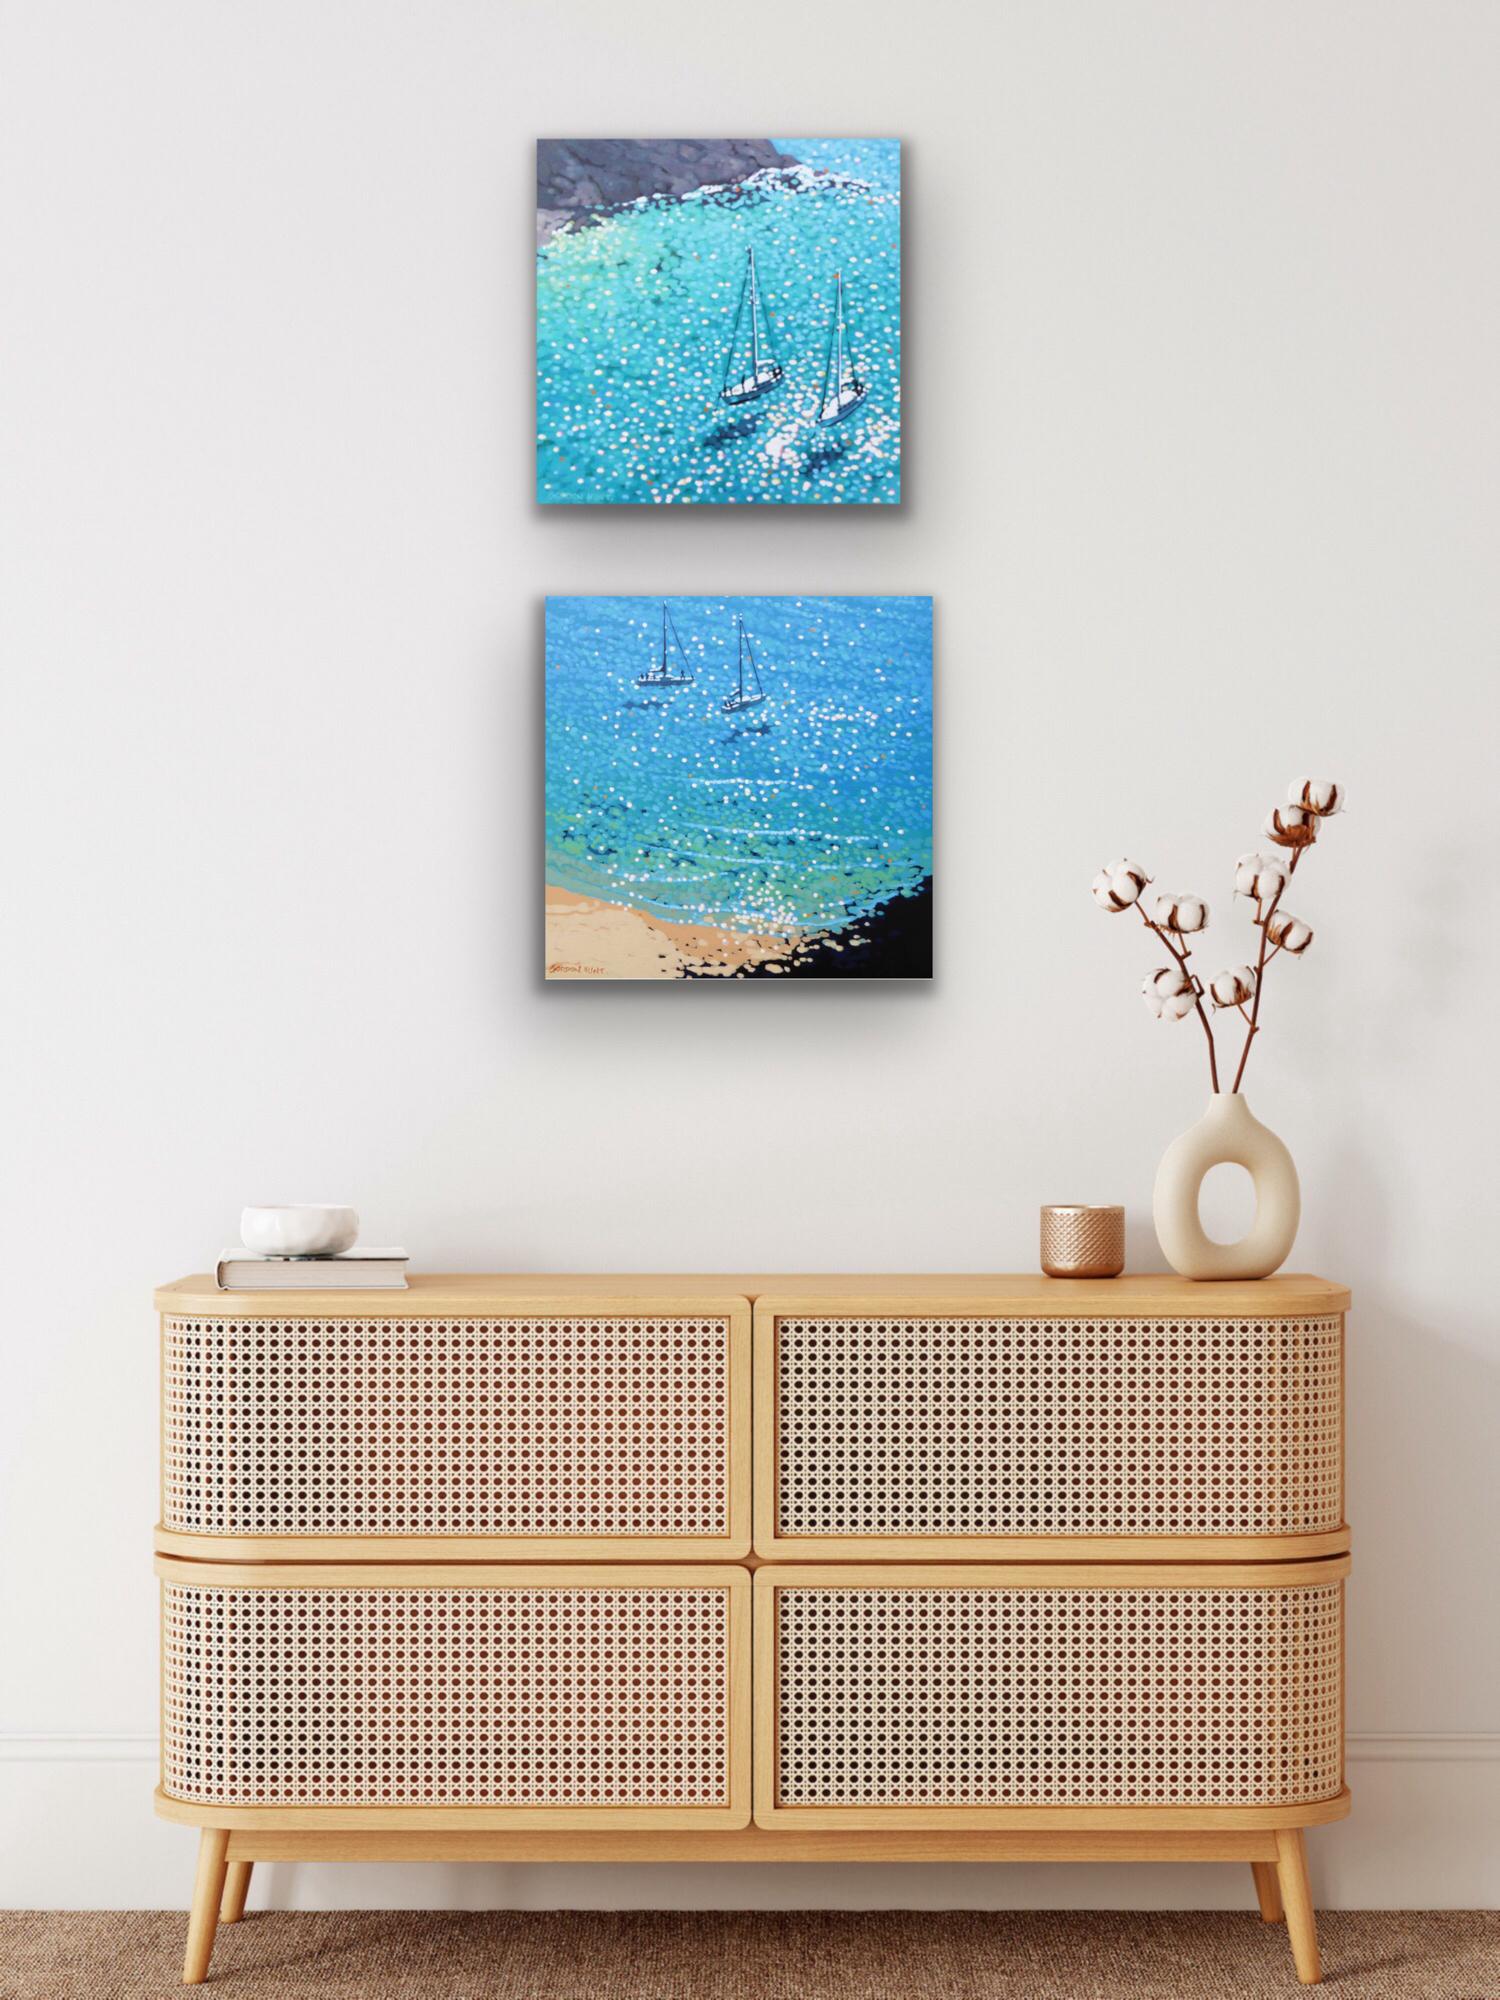 Anchored Up
Turquoise baylimited_edition

Original painted in acrylic
Edition number 120
Image size: H:20 cm x W:20 cm
Complete Size of Unframed Work: H:30 cm x W:30 cm x D:.1cm
as shown in the first image complete size for two : H60cm W:30cm
Sold